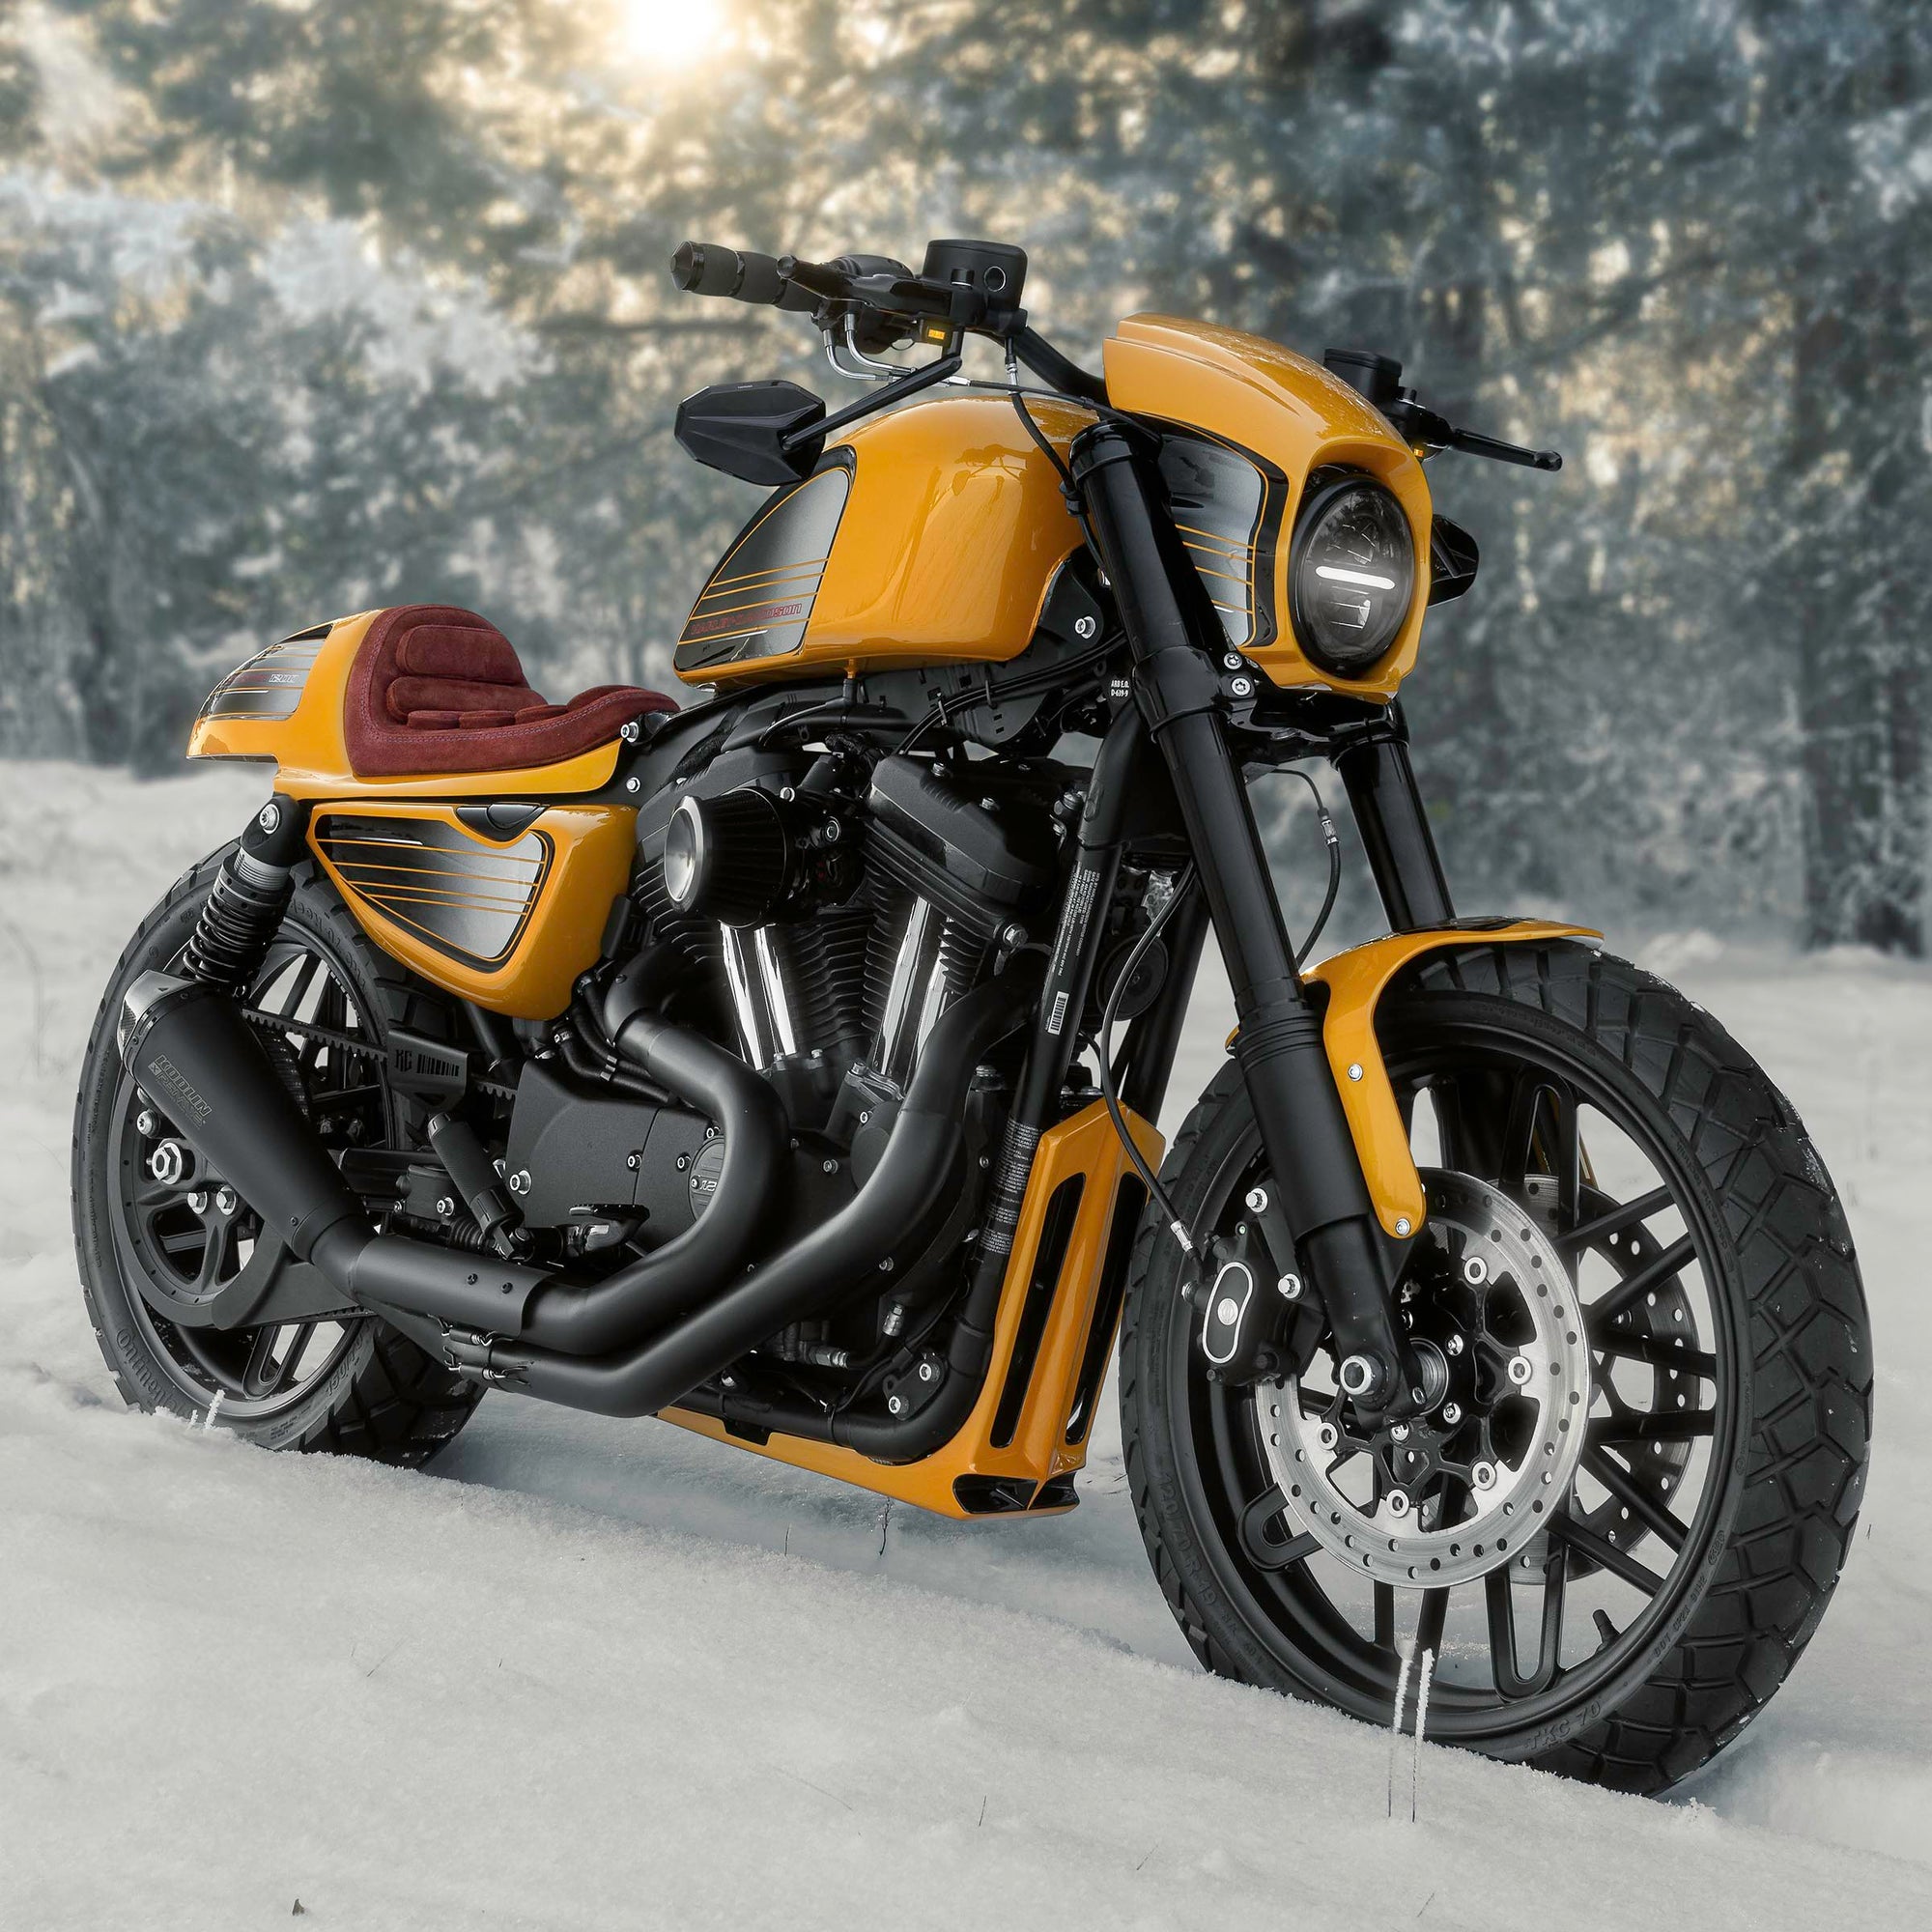 Modified Harley Davidson Roadster motorcycle with Killer Custom parts from the side outside on a sunny winter day with some snowy trees in the background